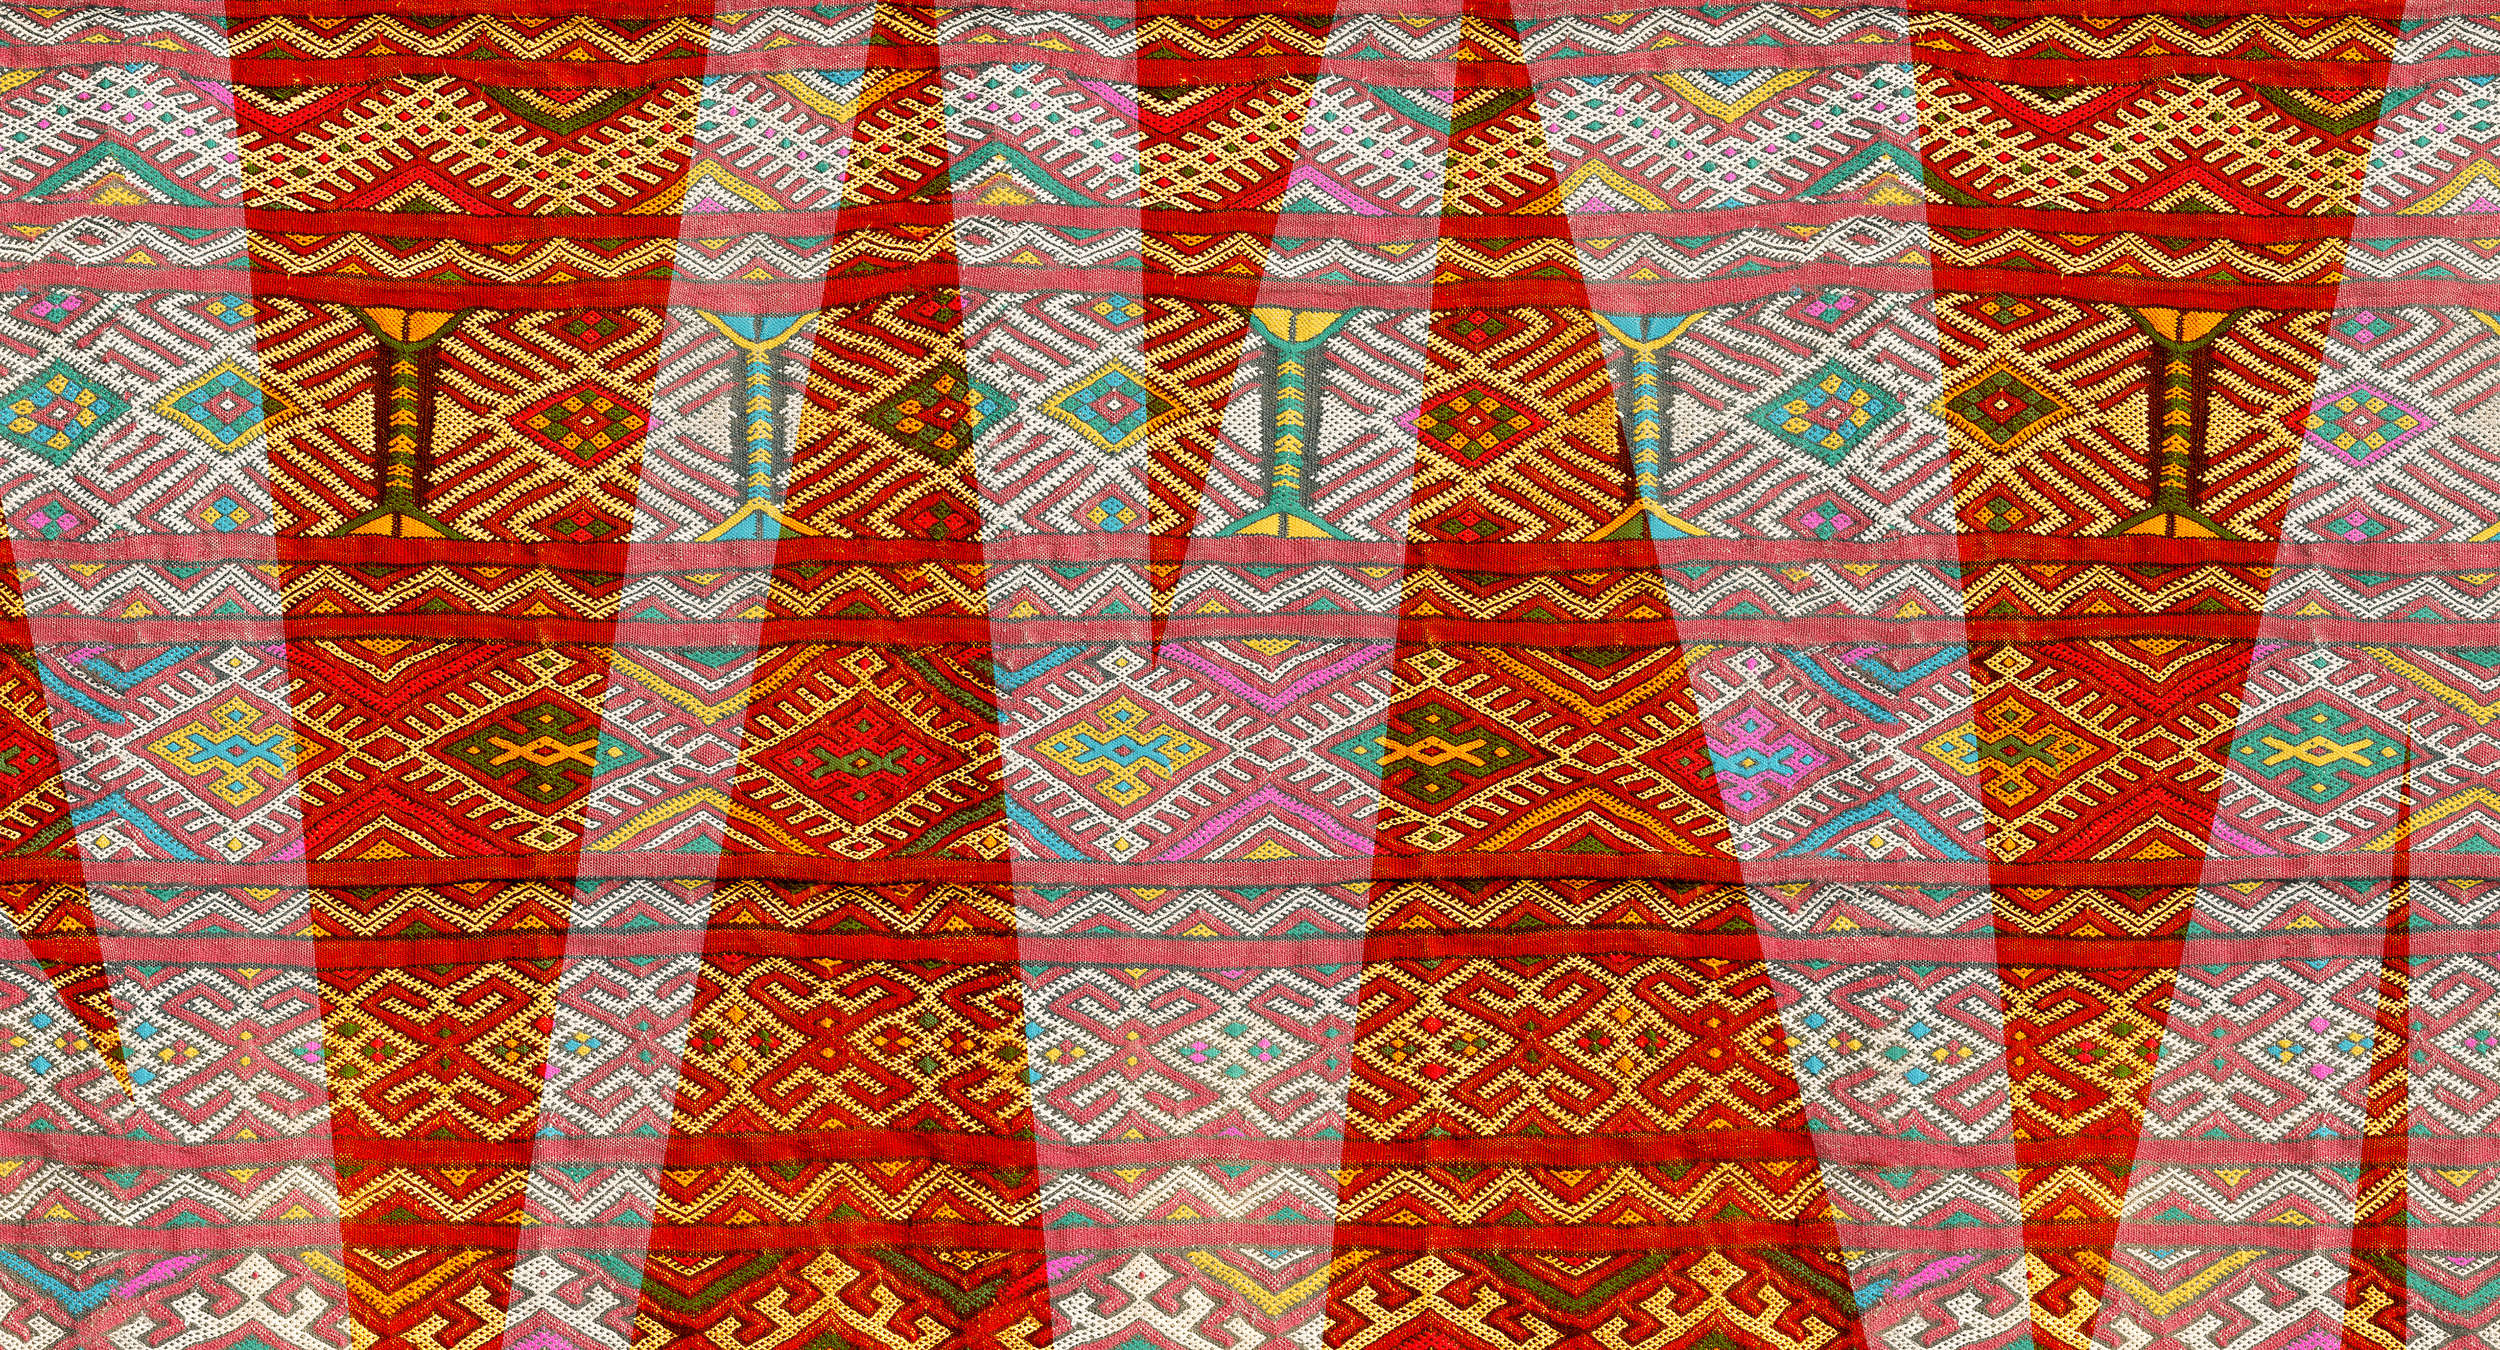             Ethno textile design & woven pattern mural - red, green, white
        